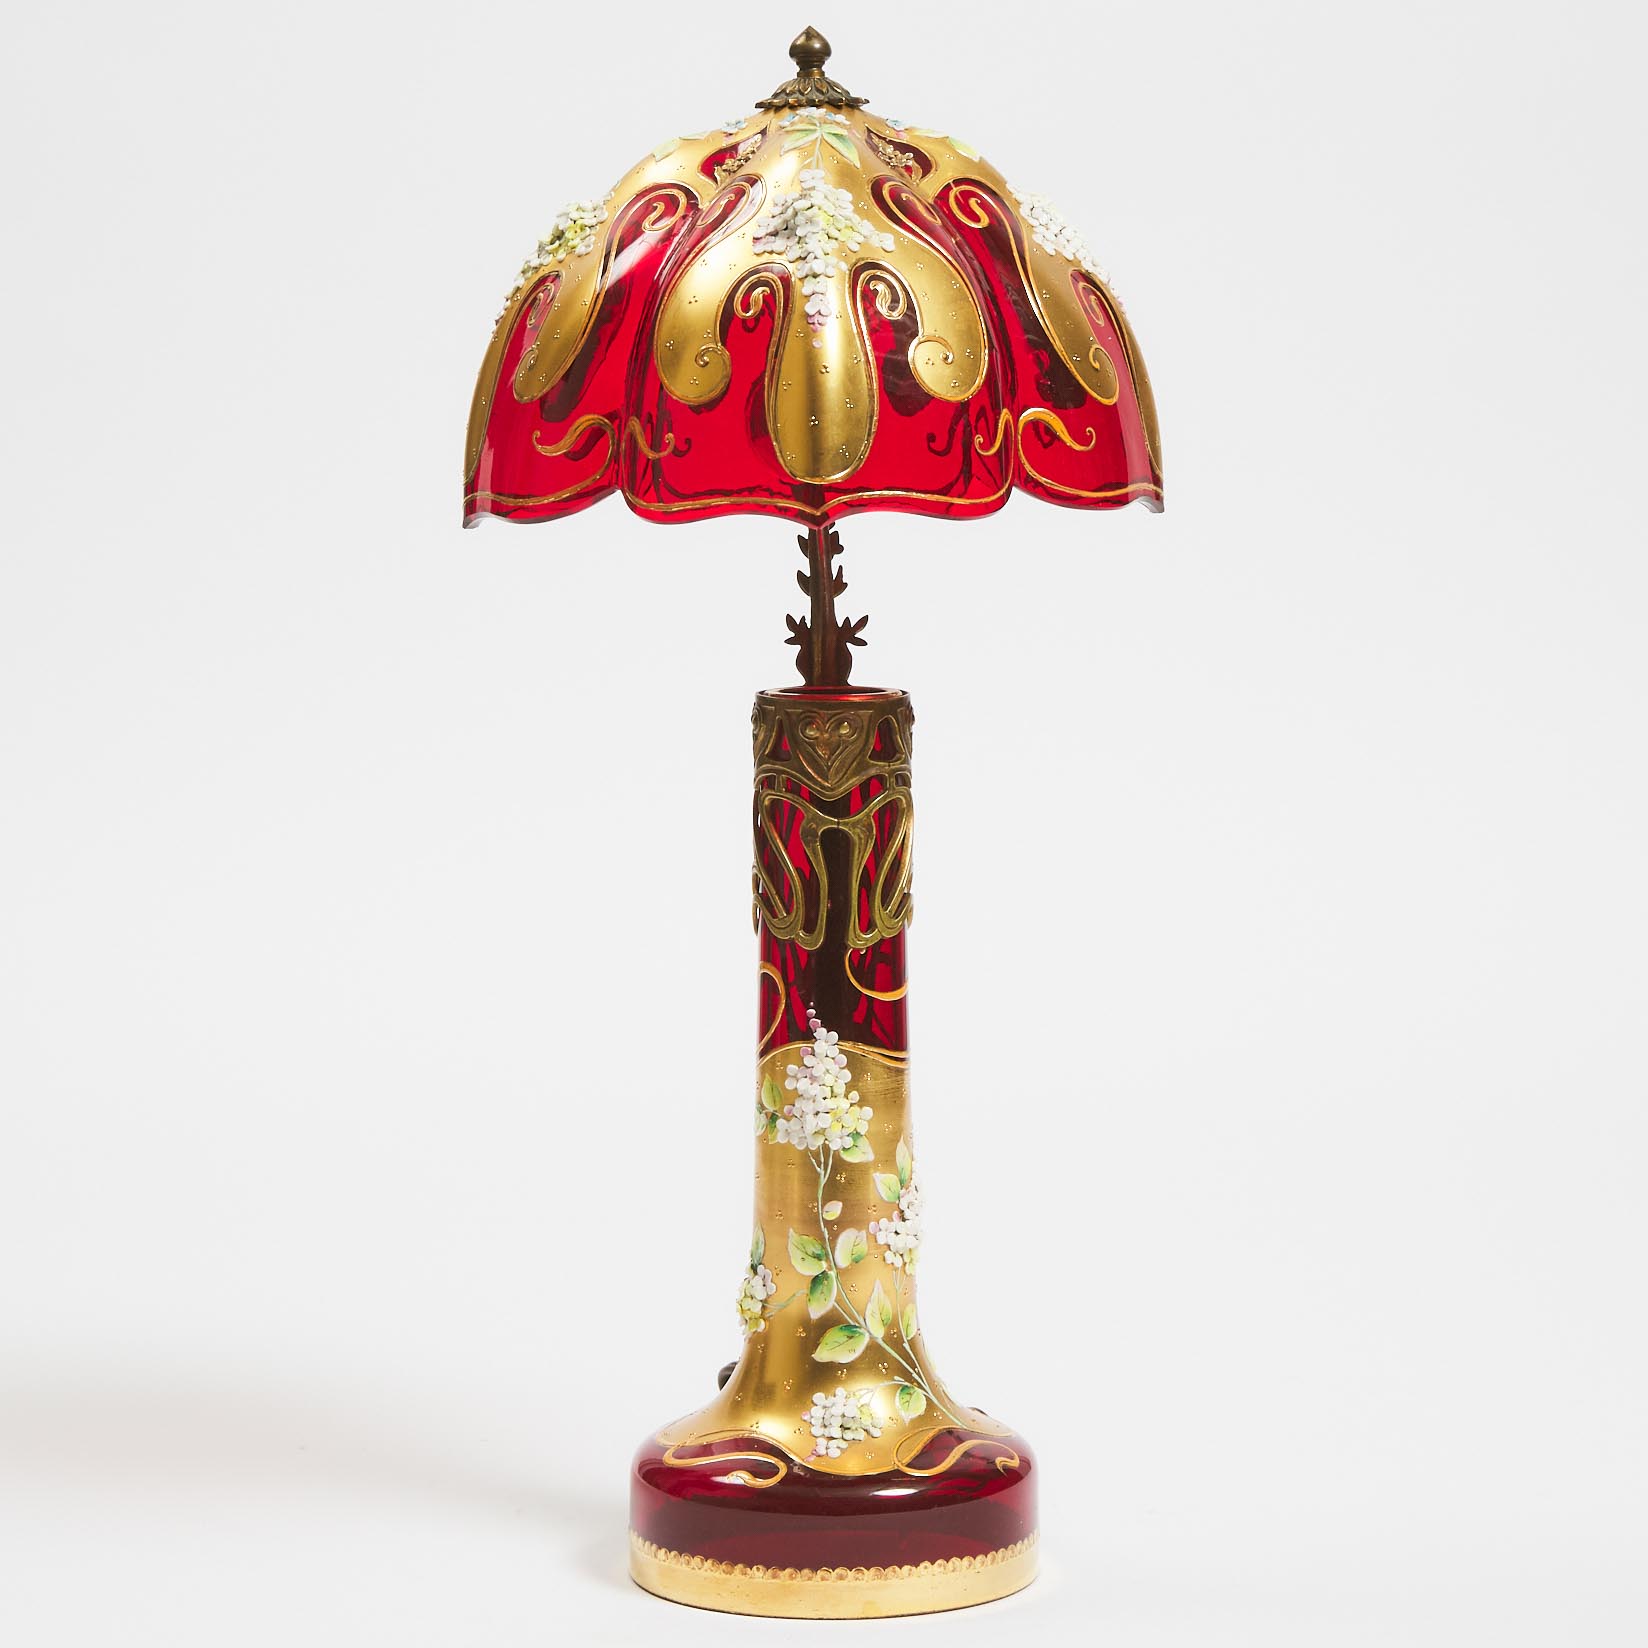 Bohemian Art Nouveau Gilt and Enamelled Red Glass Table Lamp, early 20th century